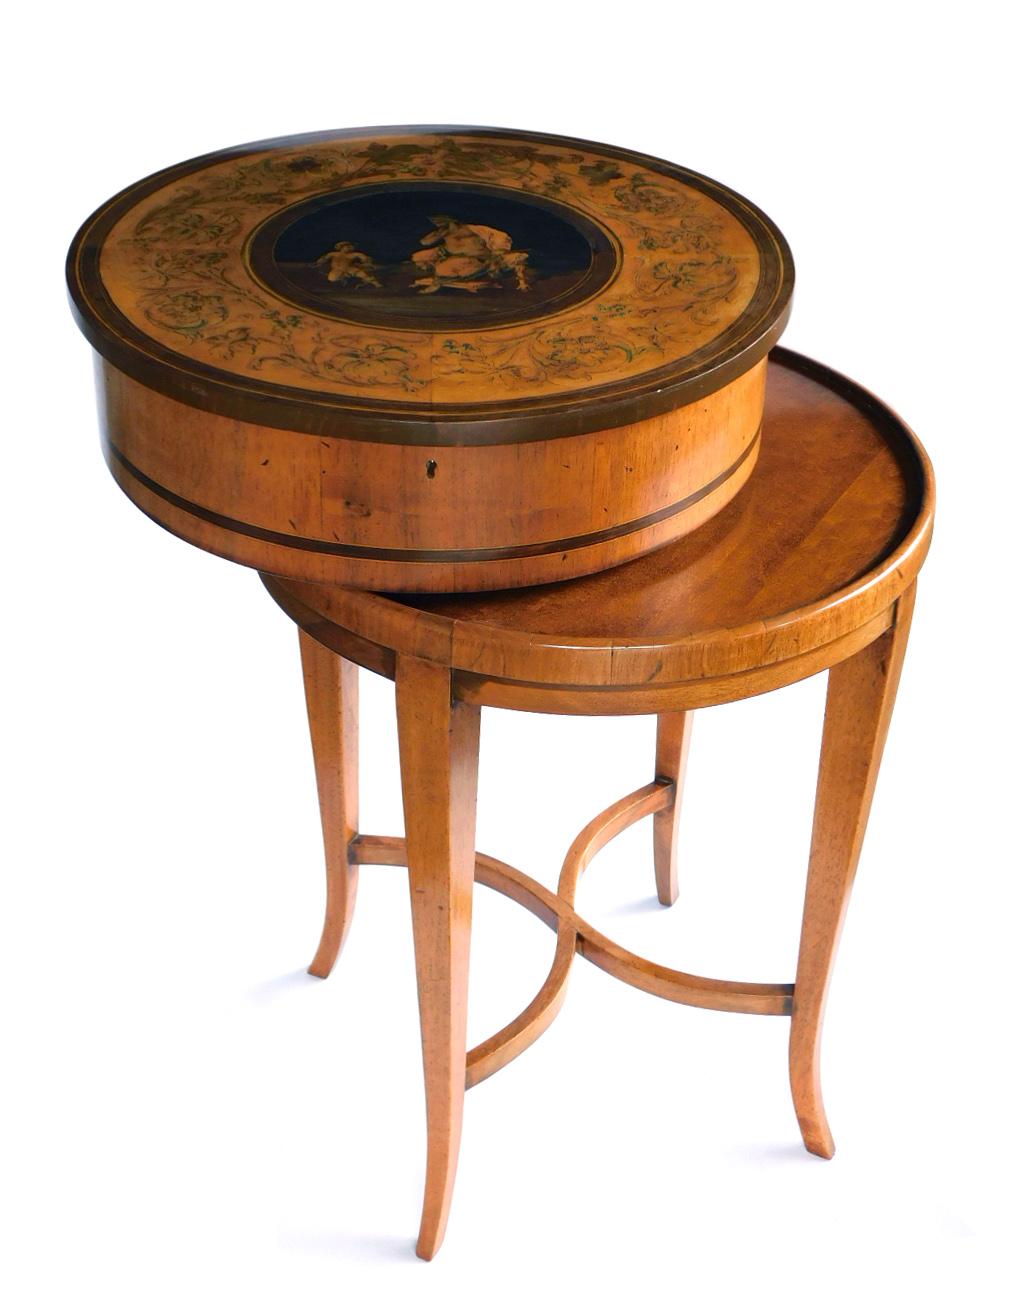 Hand-Carved Italian Neoclassical Fruitwood Inlaid Cylindrical Sewing Box on Stand For Sale